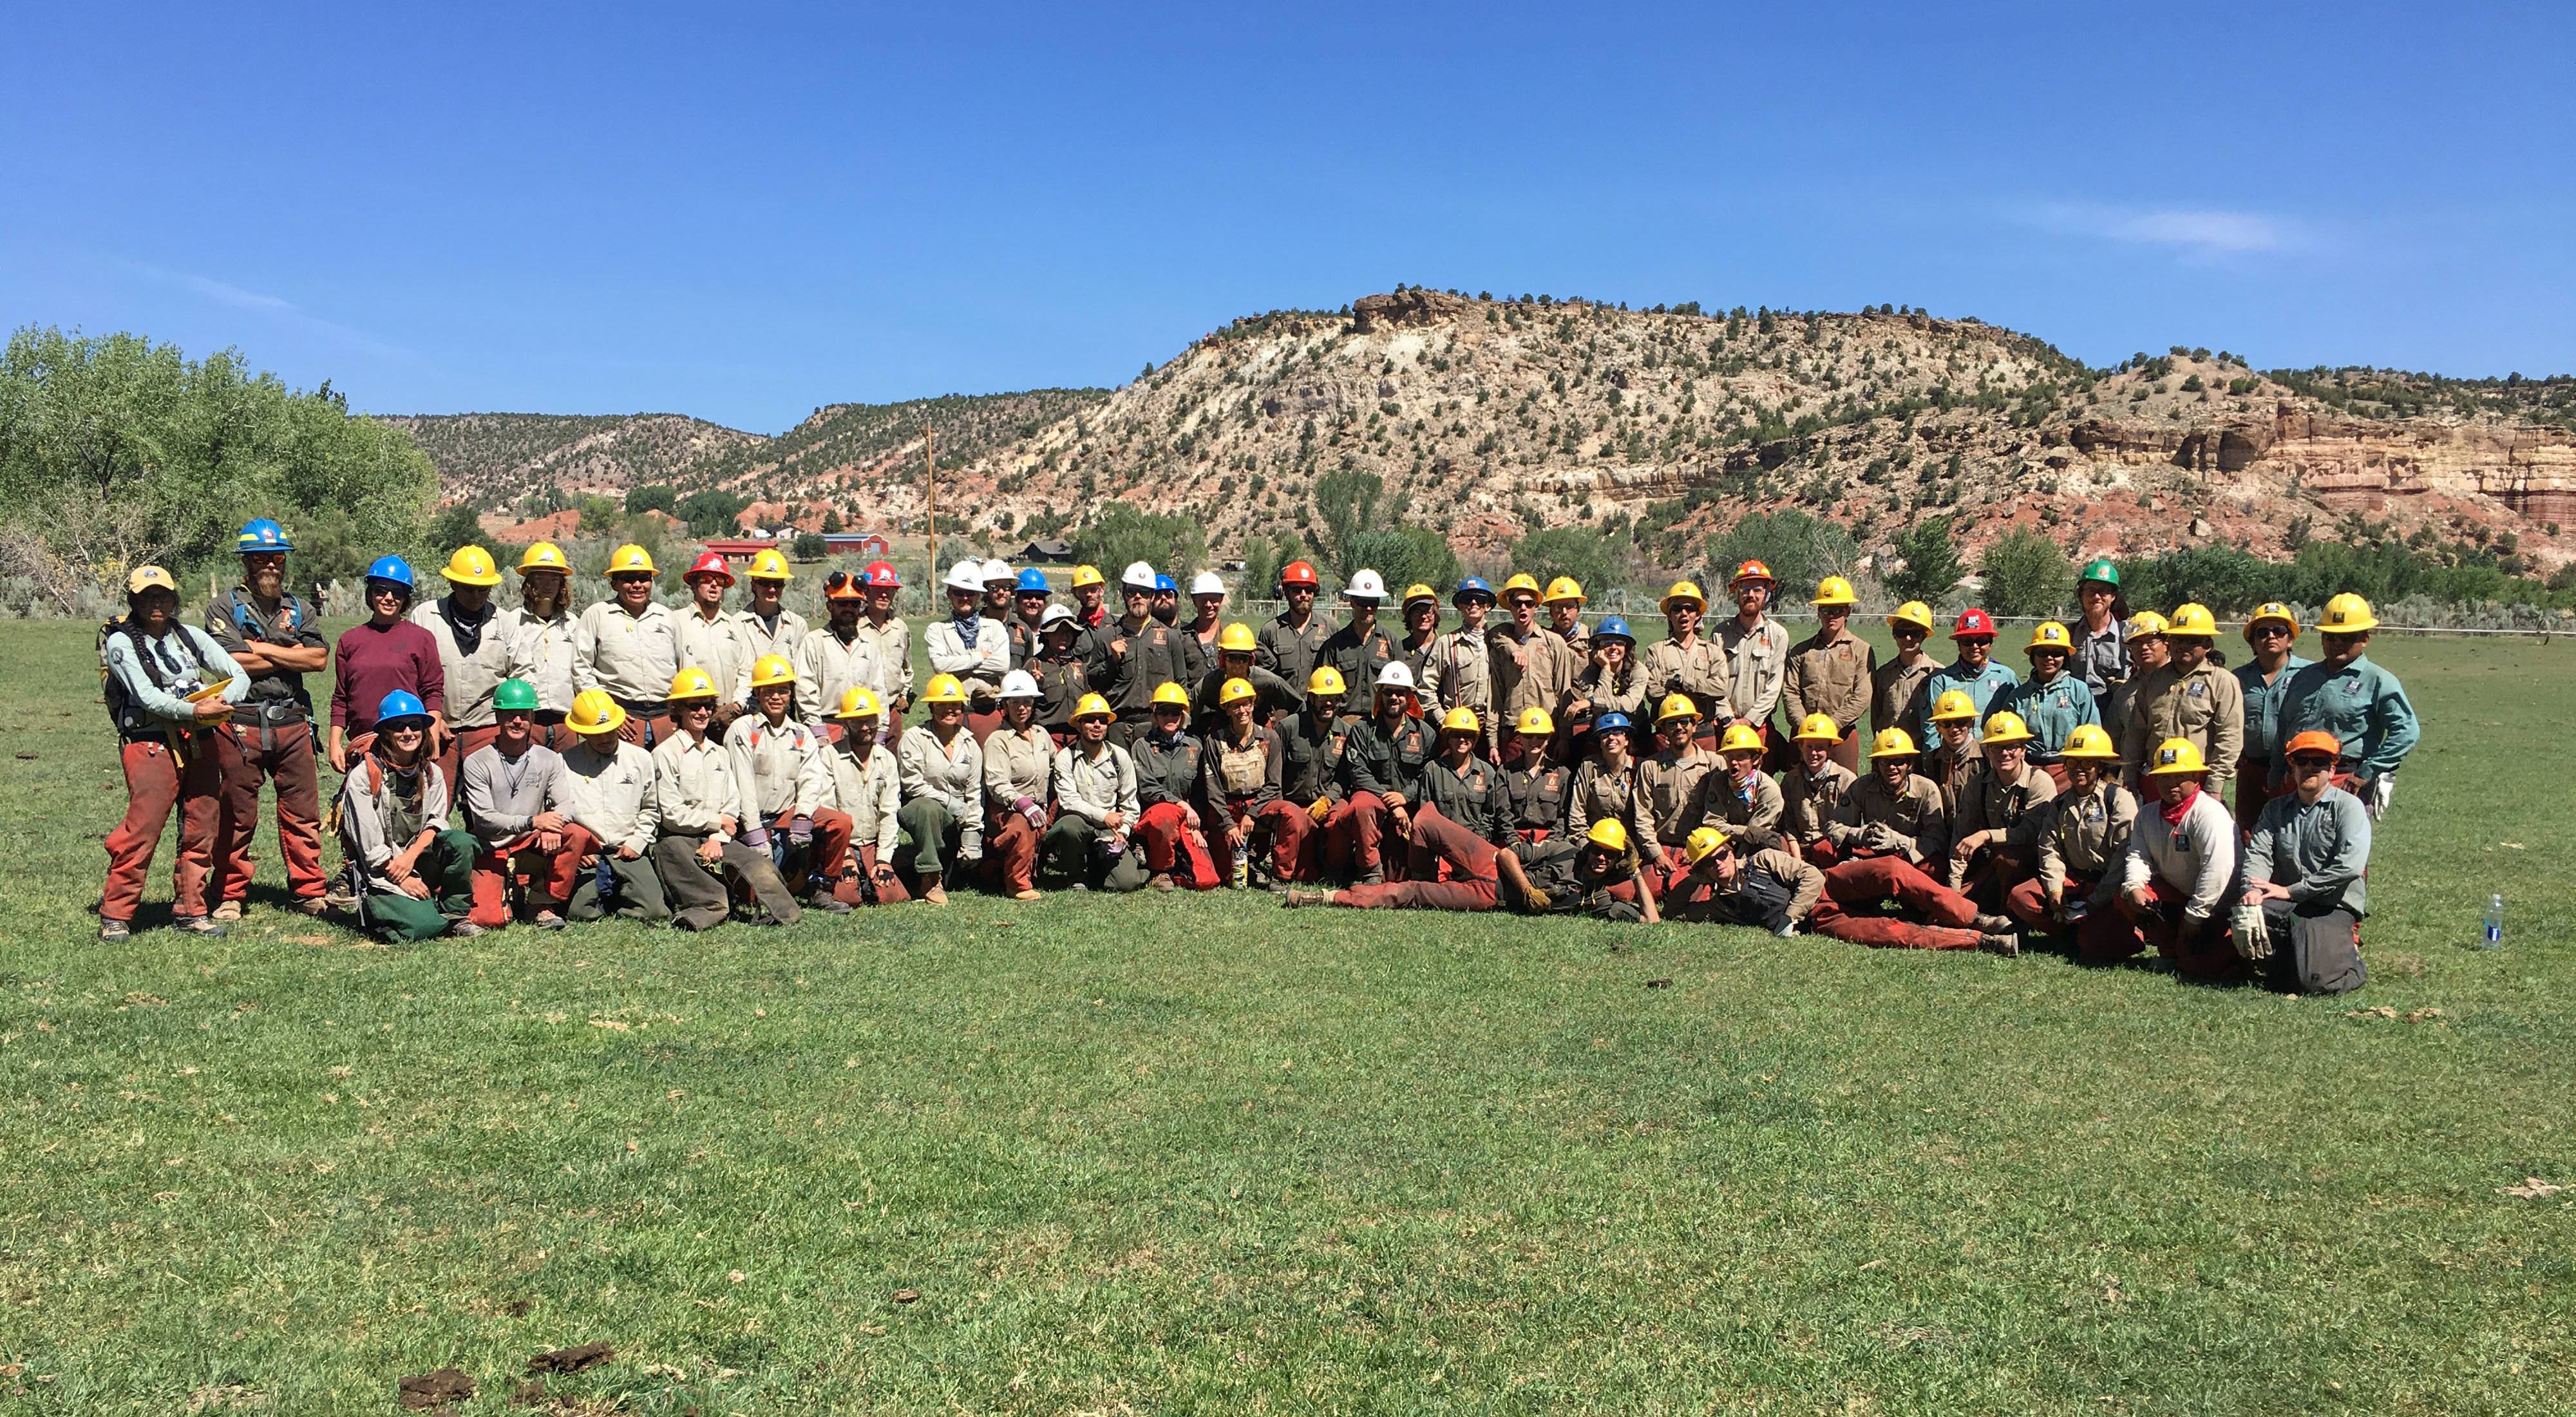 A group of more than 50 restoration crew members pose in rows, standing and sitting in the grass with red rock outcrops in the background.